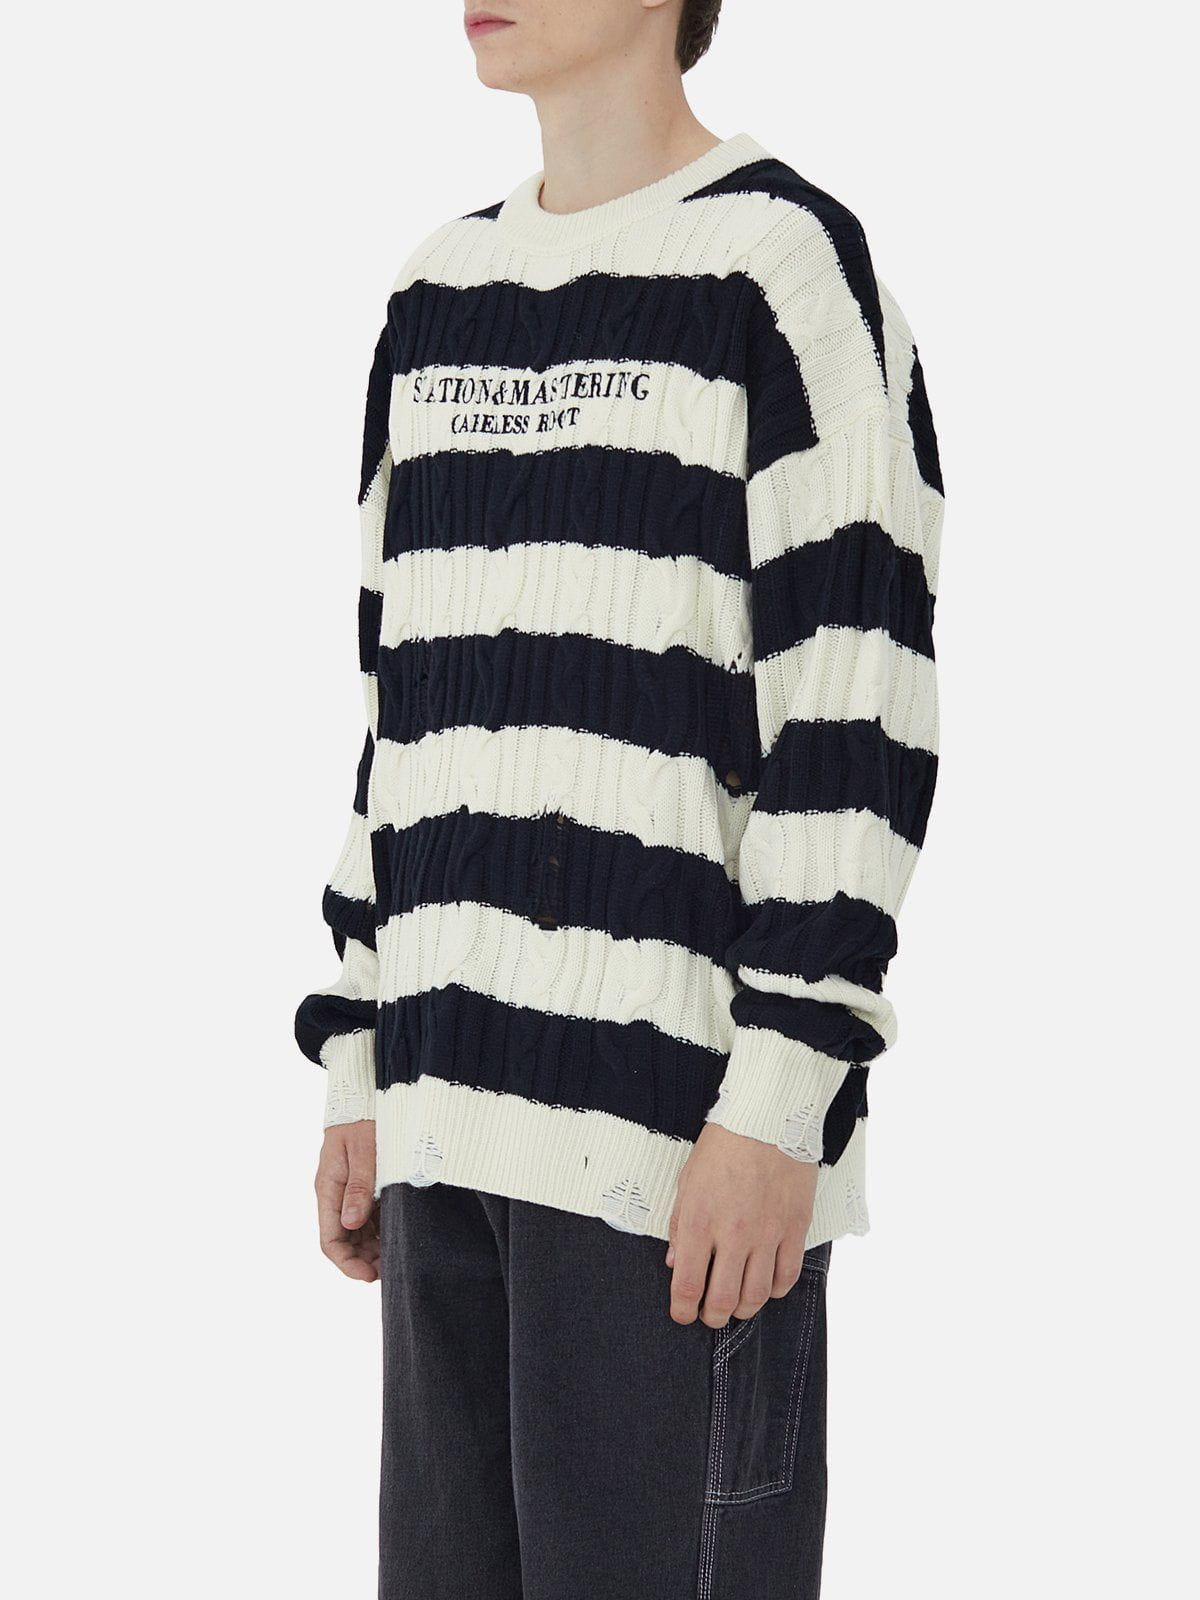 Majesda® - Torn Stripe Collision Color Sweater outfit ideas streetwear fashion